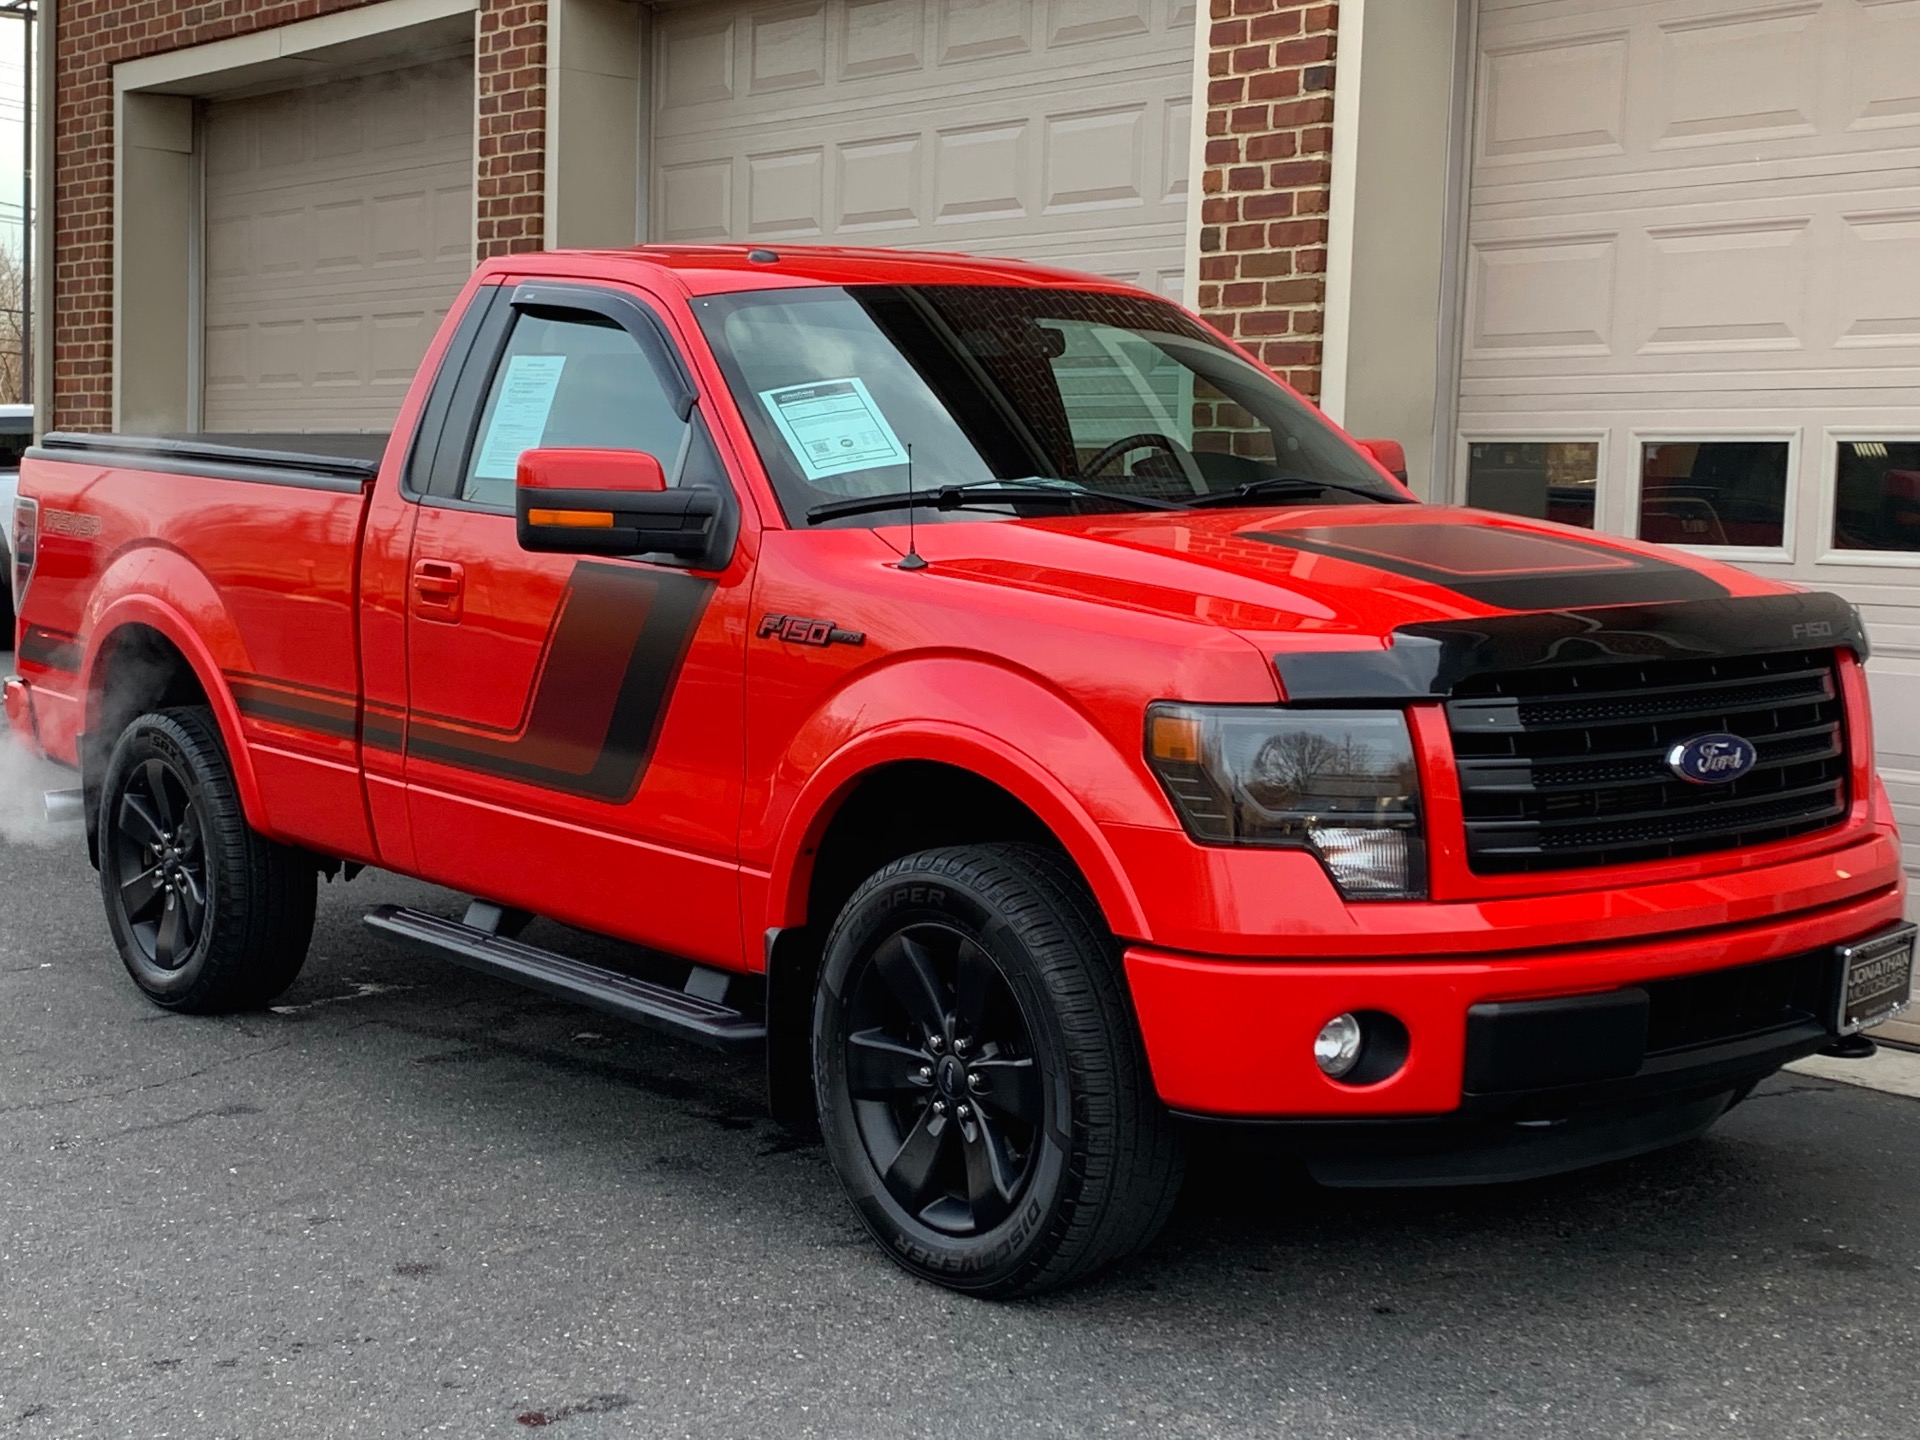 2014 Ford F 150 Fx4 Tremor Stock B80188 For Sale Near Edgewater Park